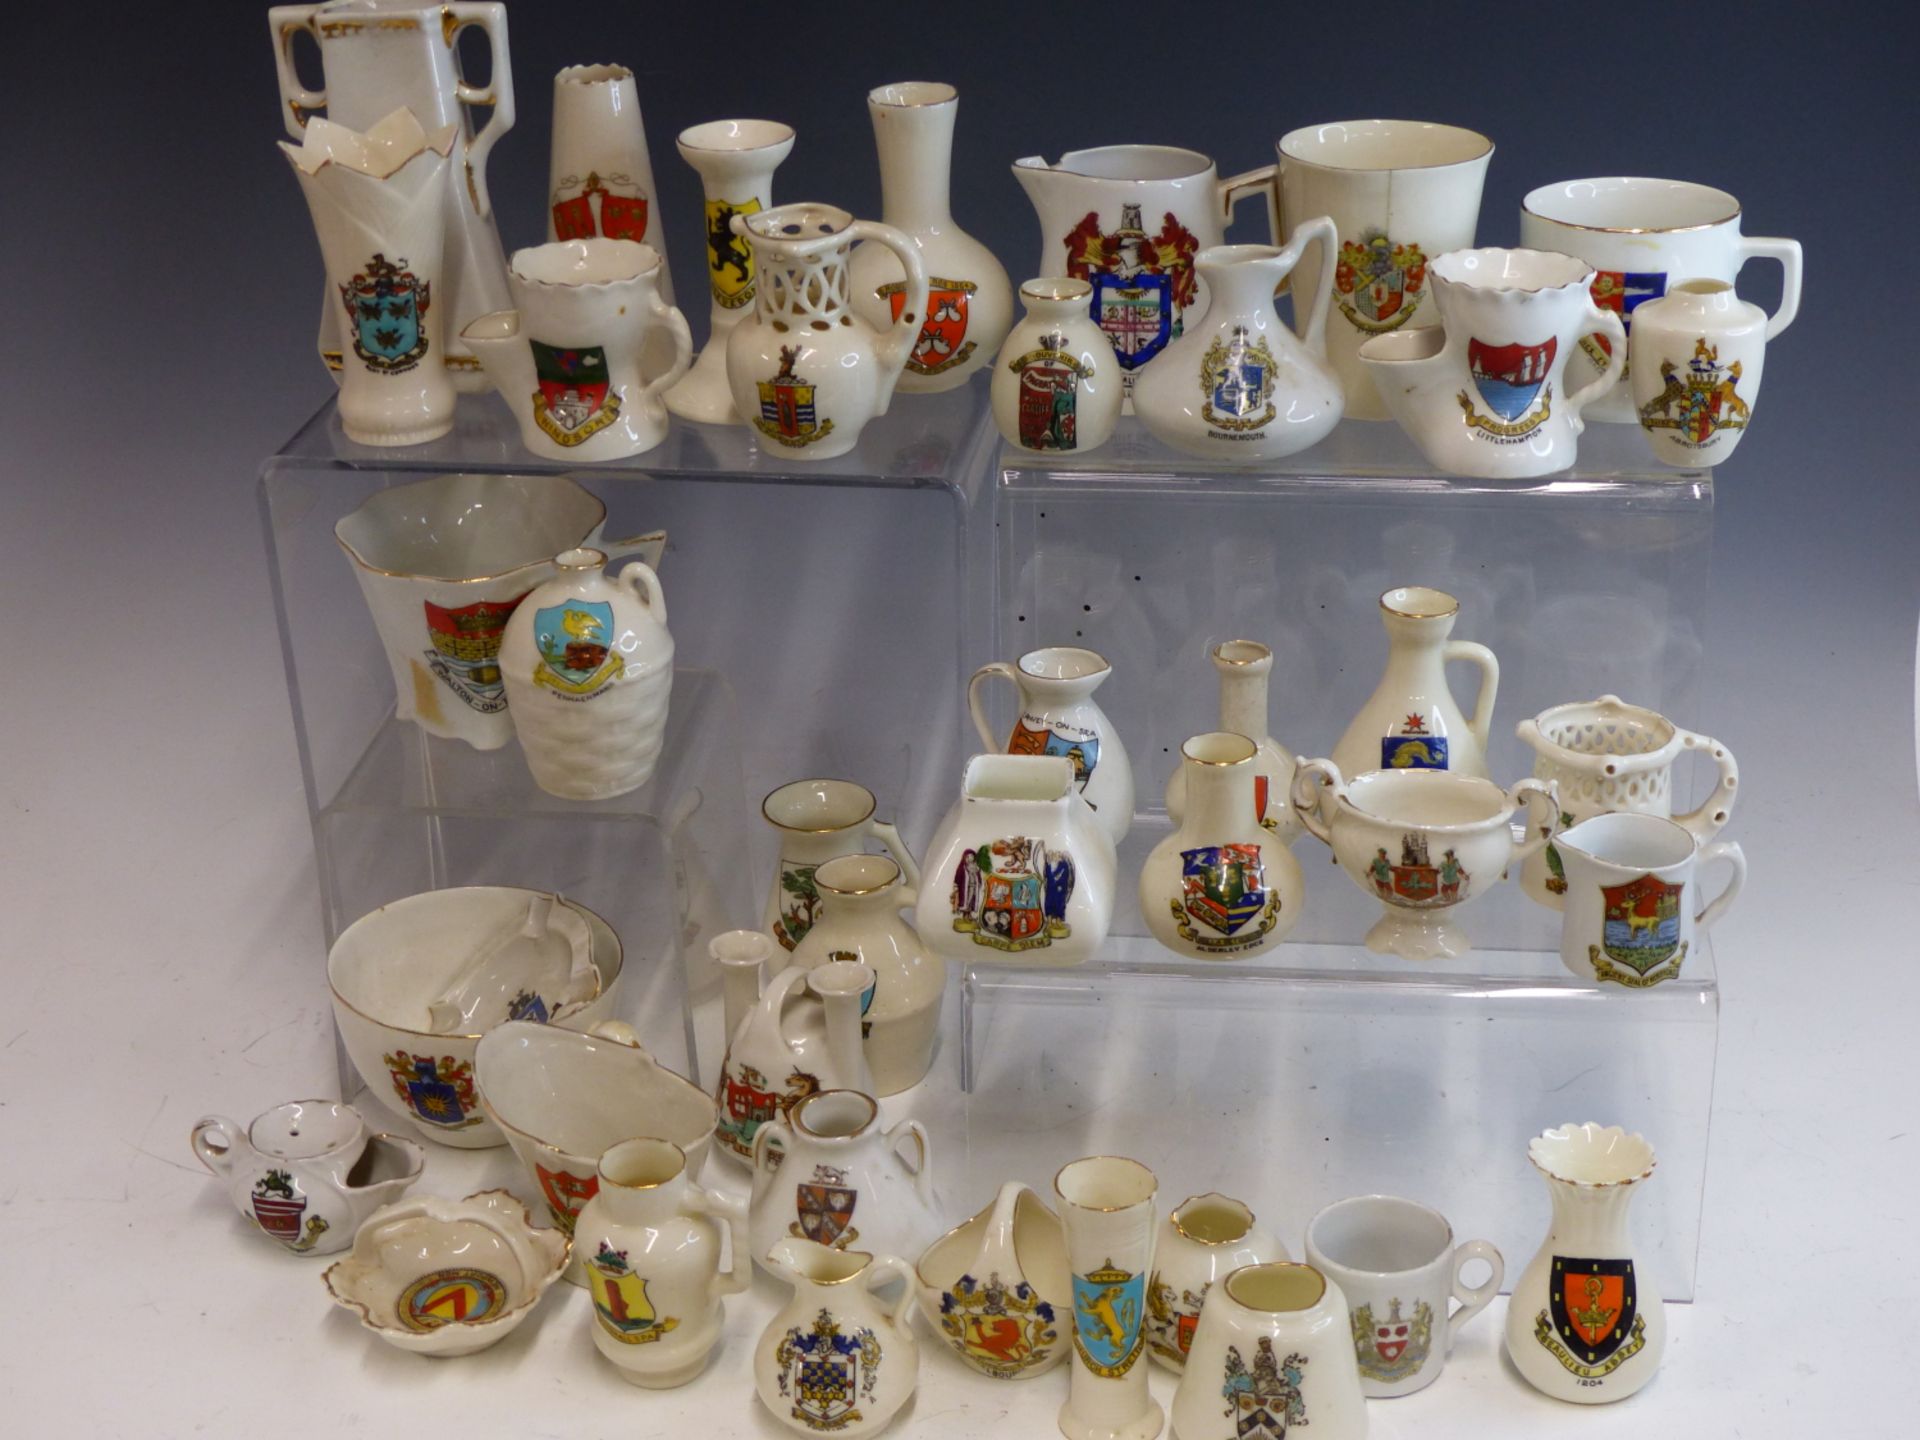 A COLLECTION OF VINTAGE CRESTED WARES INCLUDING TUSCAN, SAVOY, SHELLEY, ARCADIAN, AND OTHERS.